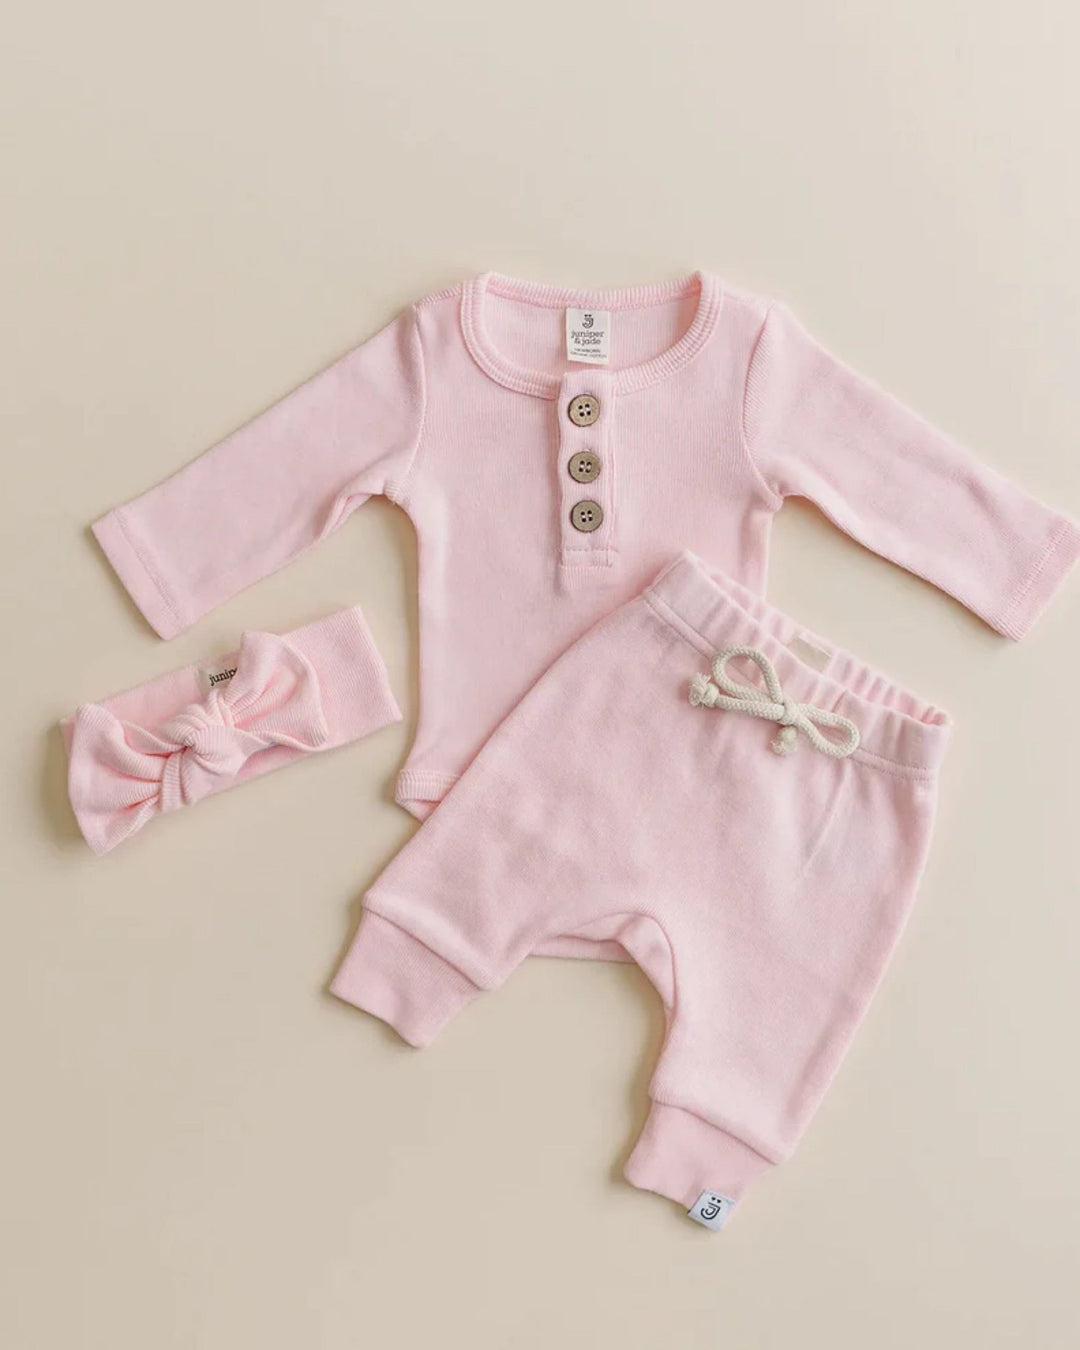 Organic Knot Bow, Pink - Baby & Toddler Clothing Accessories - LUCKY PANDA KIDS